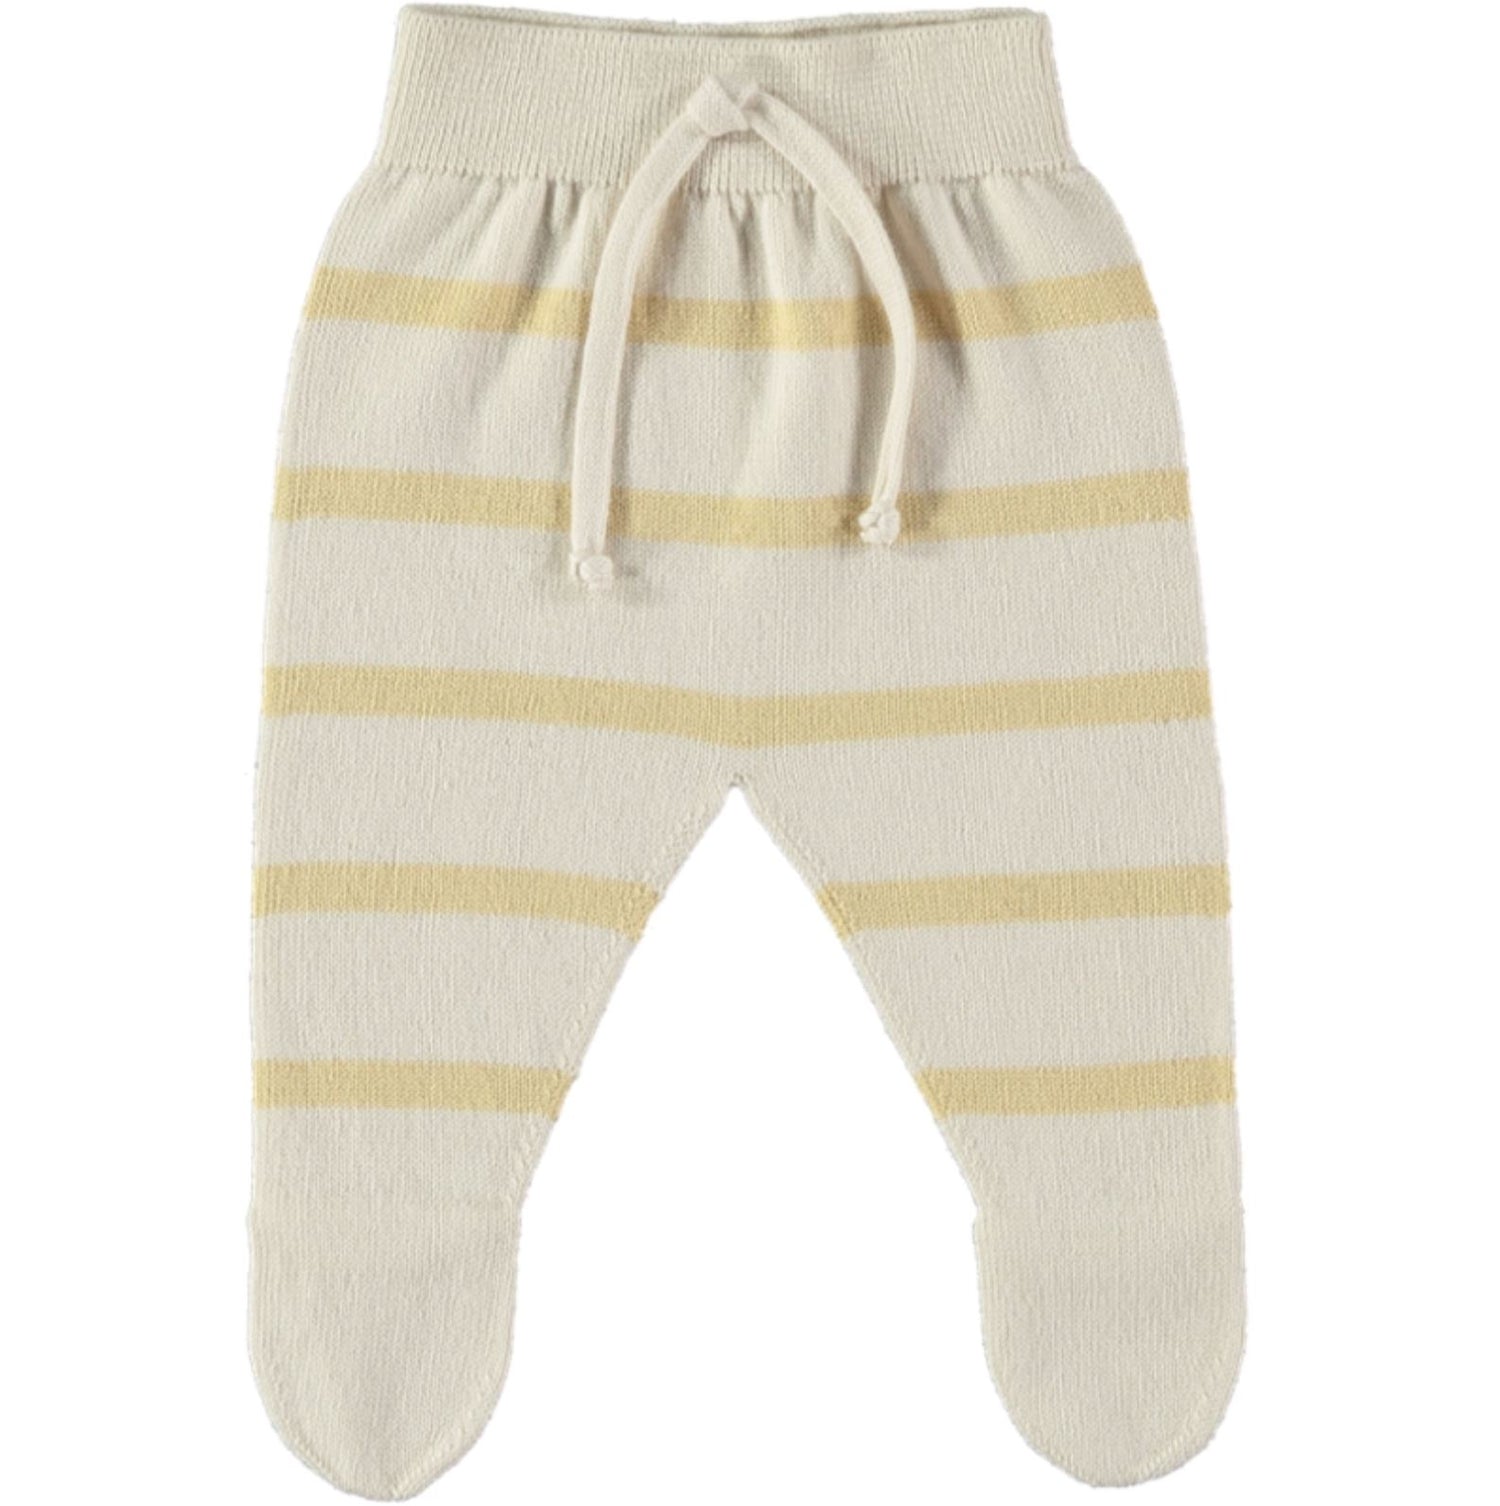 Butter Striped Knit Footed Pants 120 BABY GIRLS APPAREL Li & Me NB 